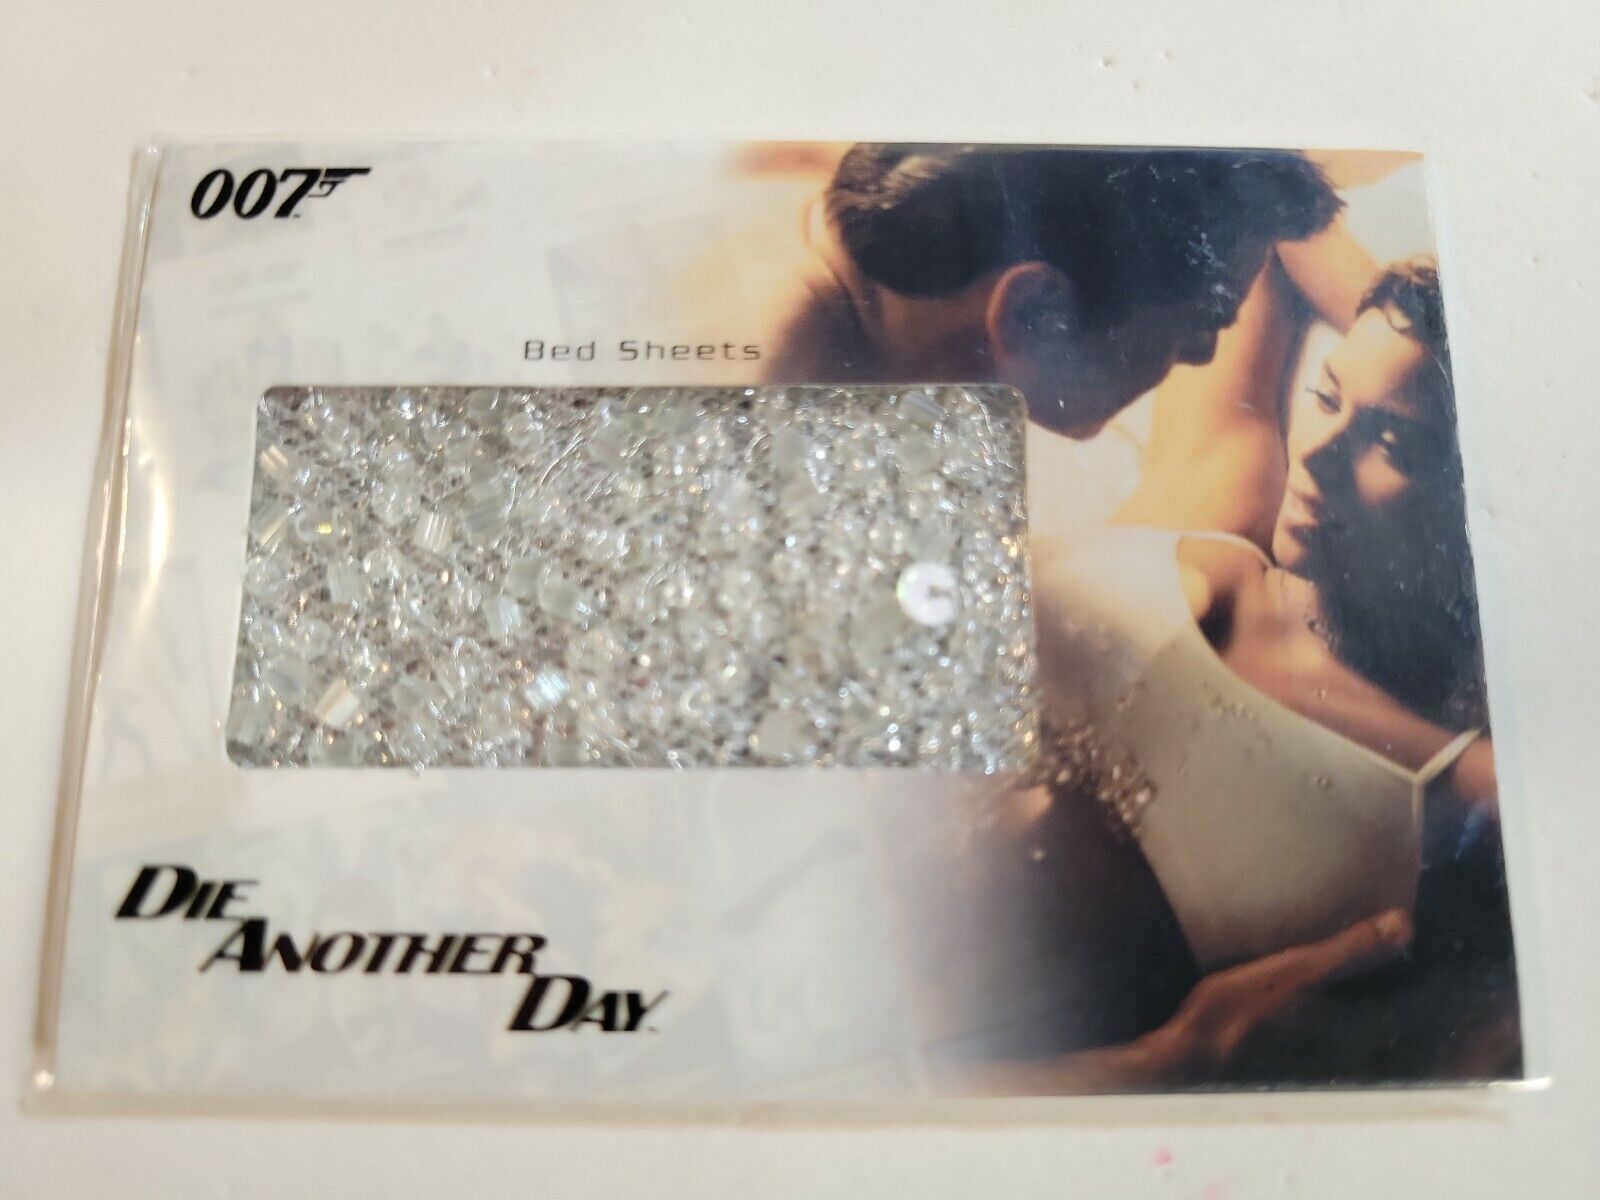 2008 JAMES BOND 007 IN MOTION DIE ANOTHER DAY BED SHEET RC20 RELIC CARD #299/375